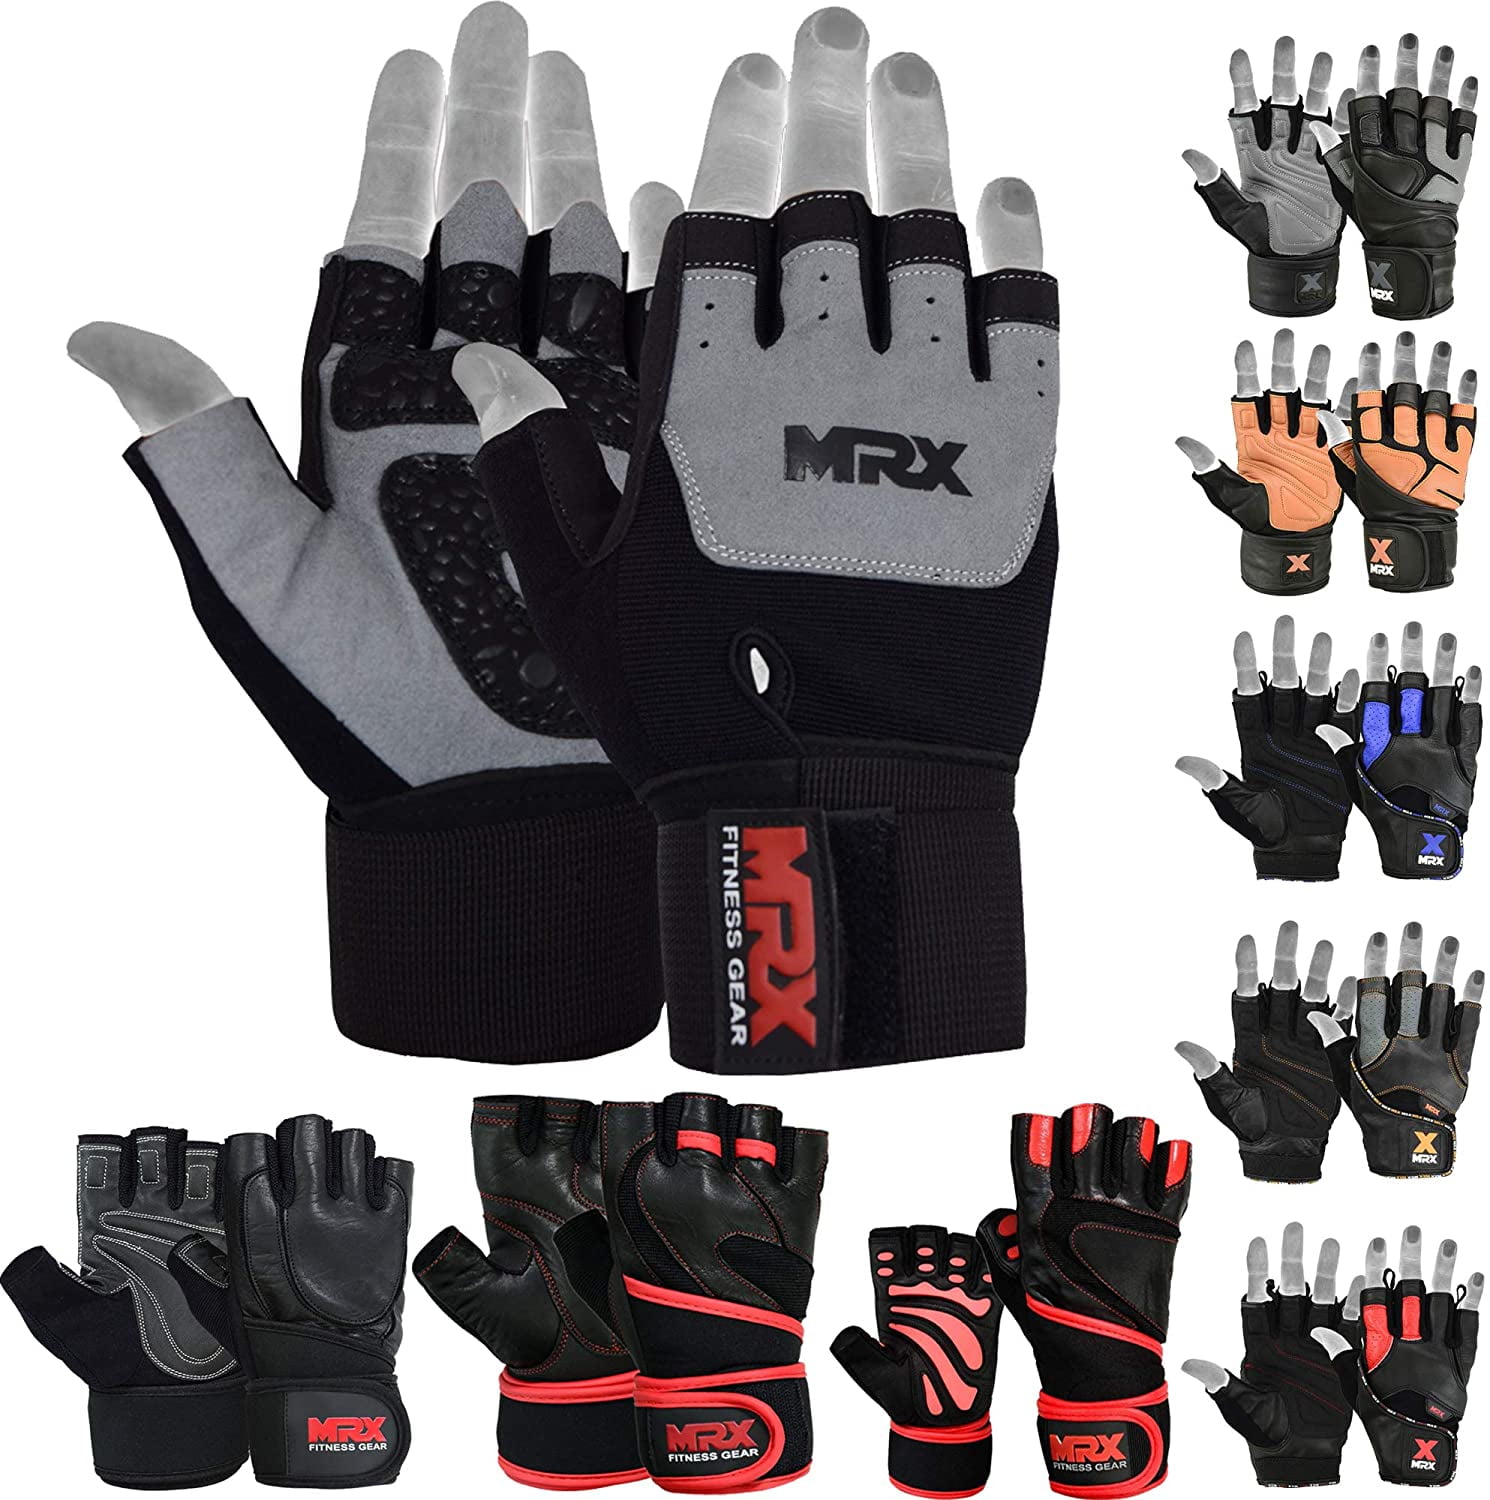 Onex Gym  Lift Weight Liftings Fitness Gloves Home Exercise gloves Mesh Gloves 